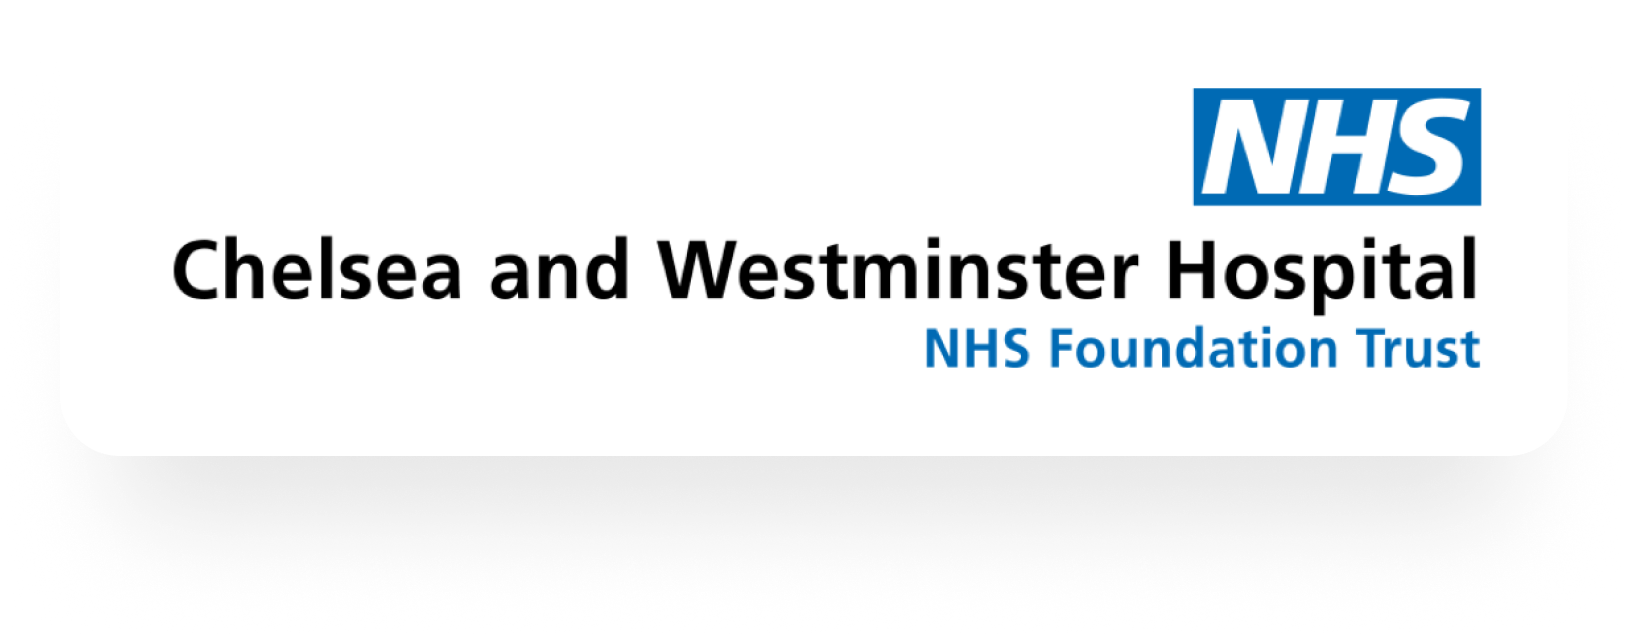 Chelsea and Westminster Hospital NHS Foundation Trust